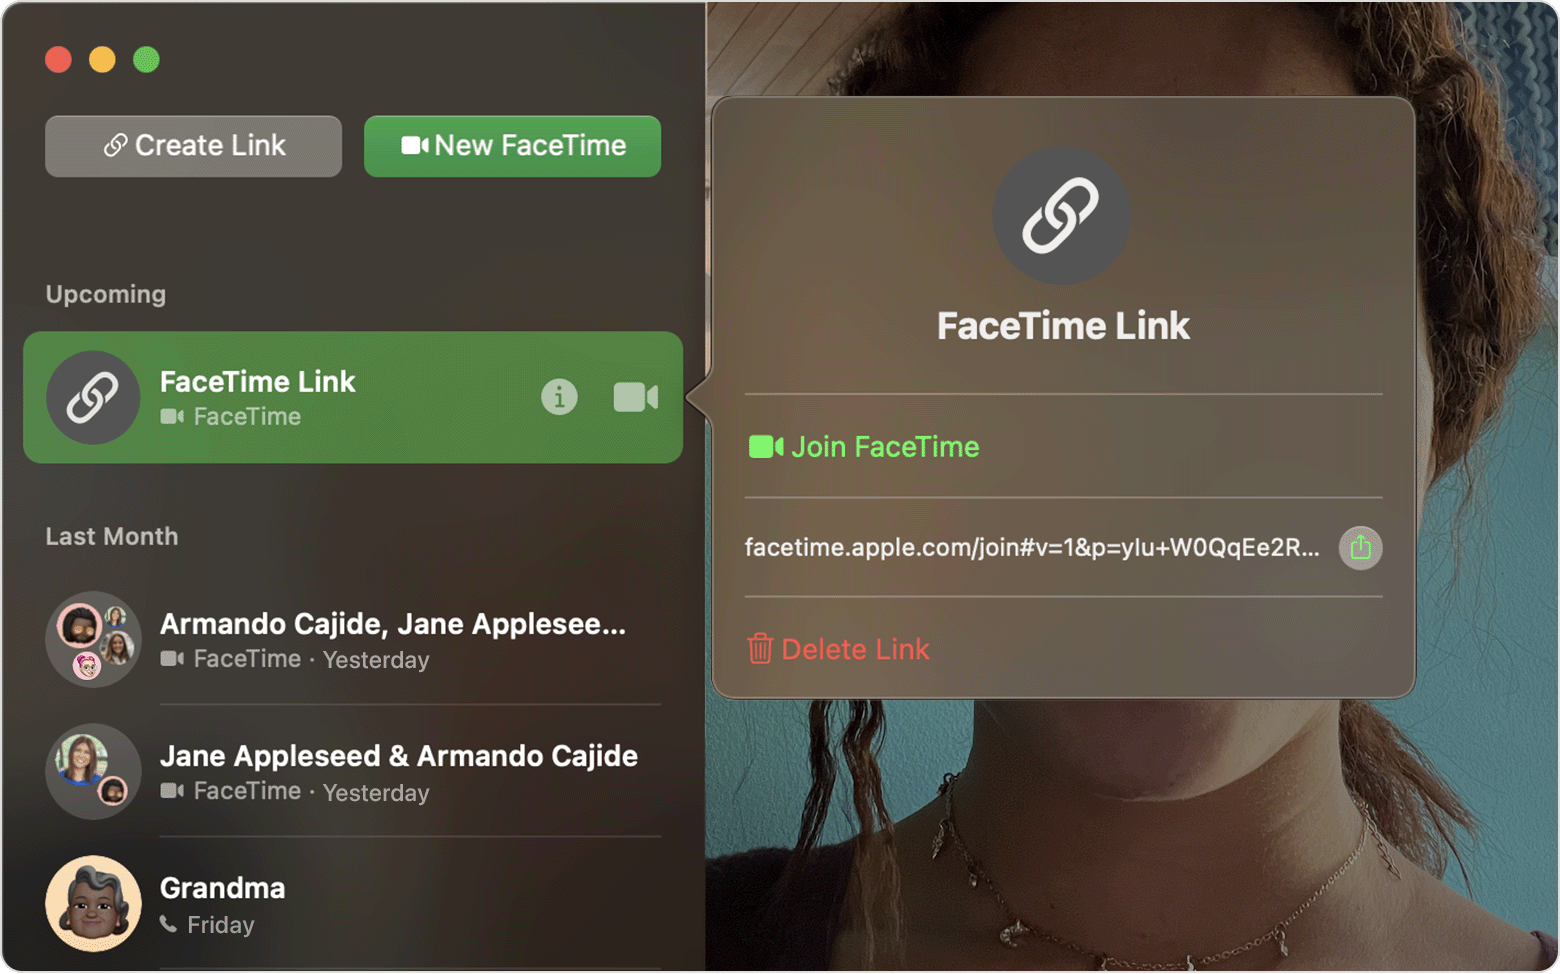 FaceTime window after clicking the Info button next to FaceTime Link